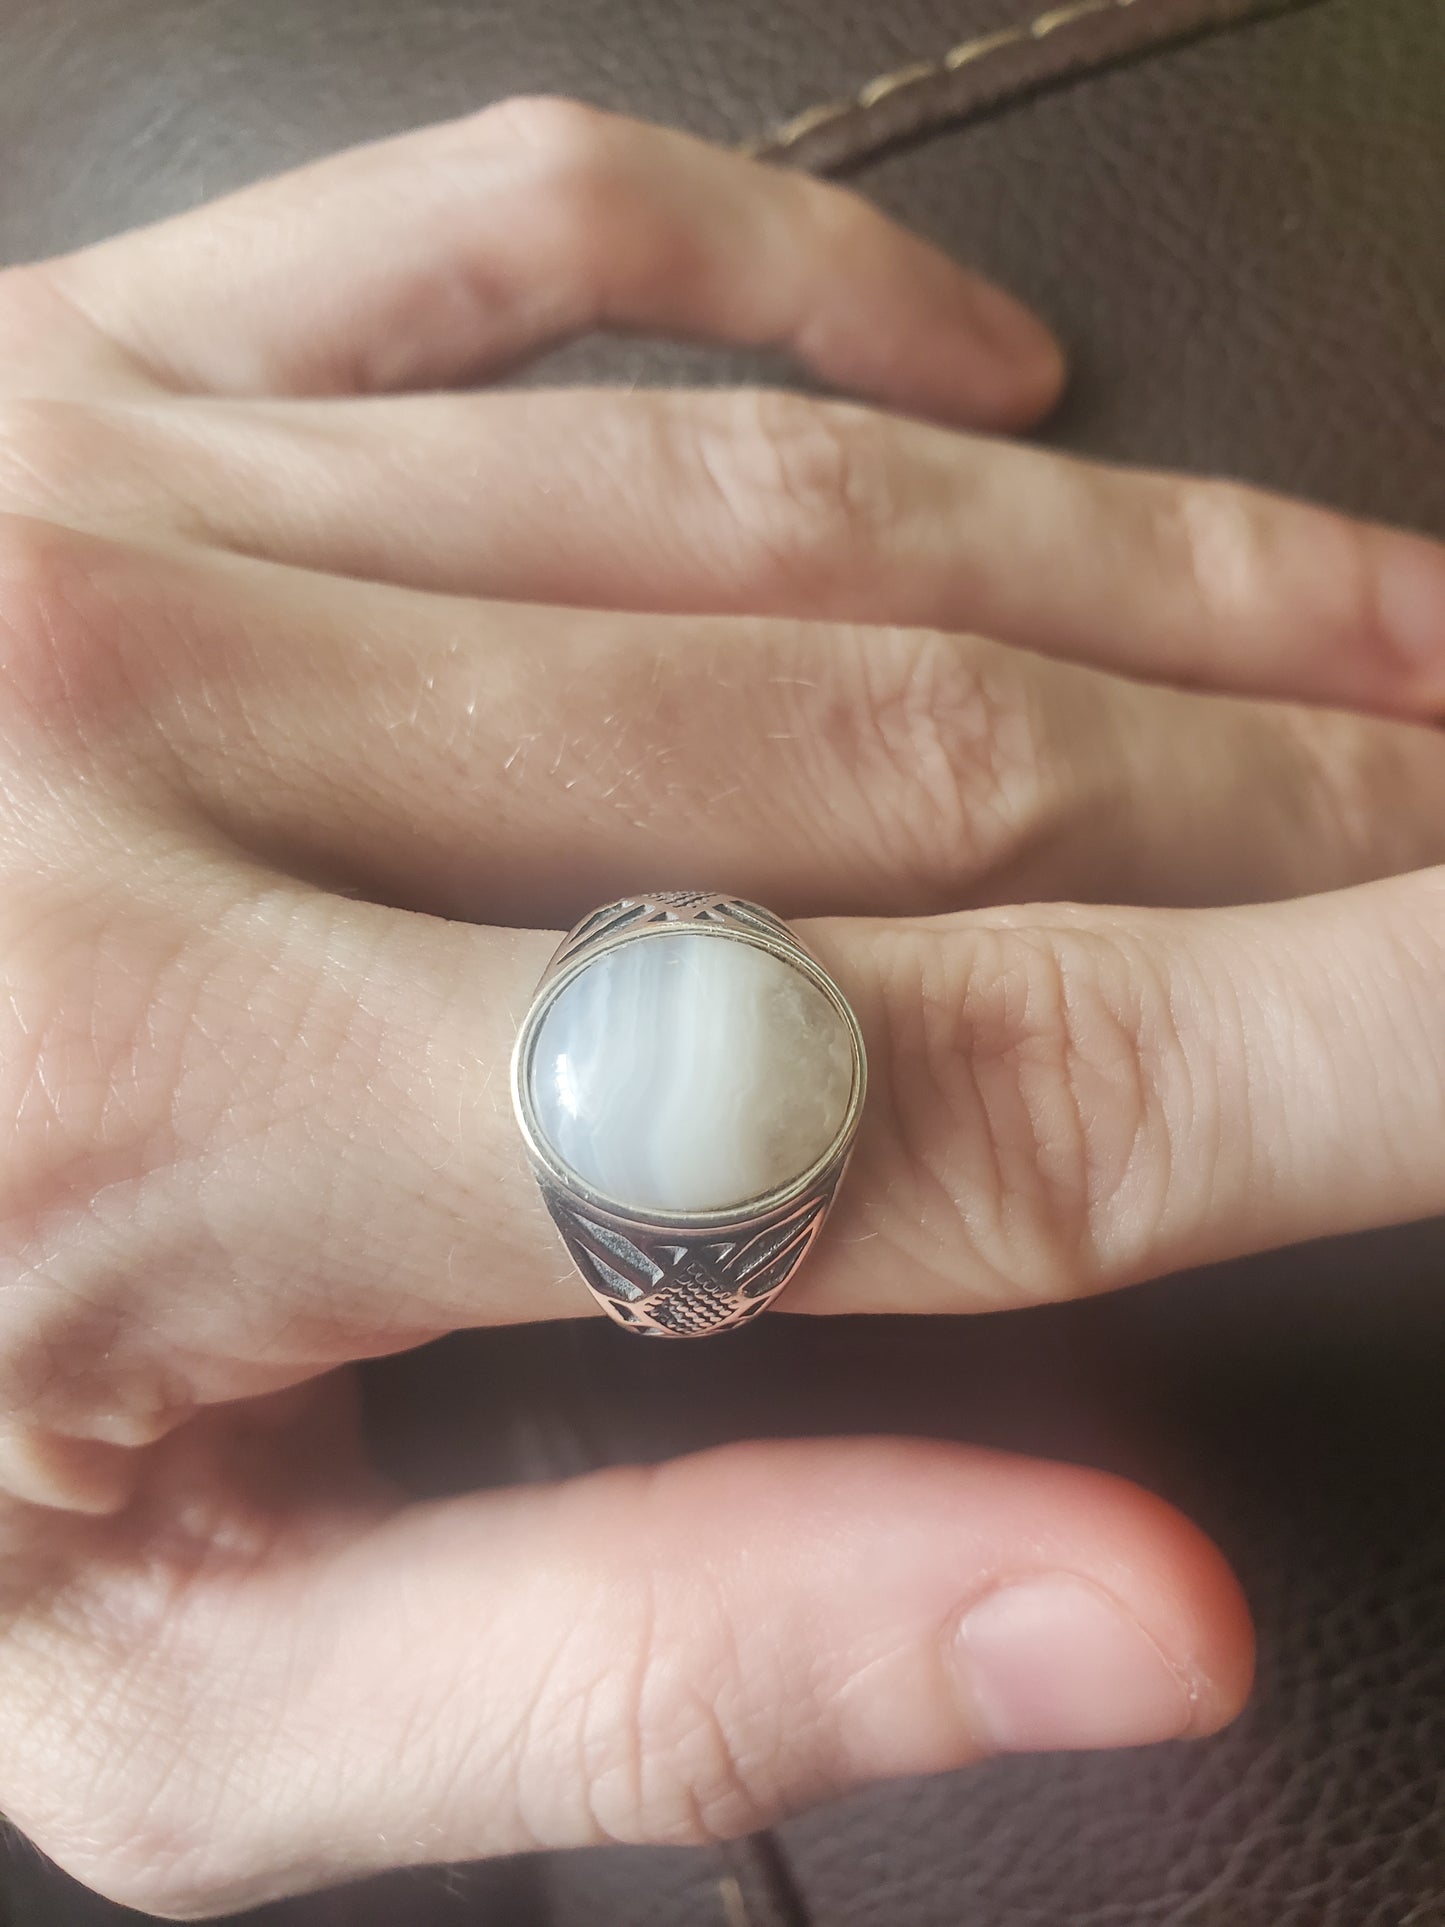 Banded Agate and Quartz Adjustable Ring - Silver, 12mm Oval Cab